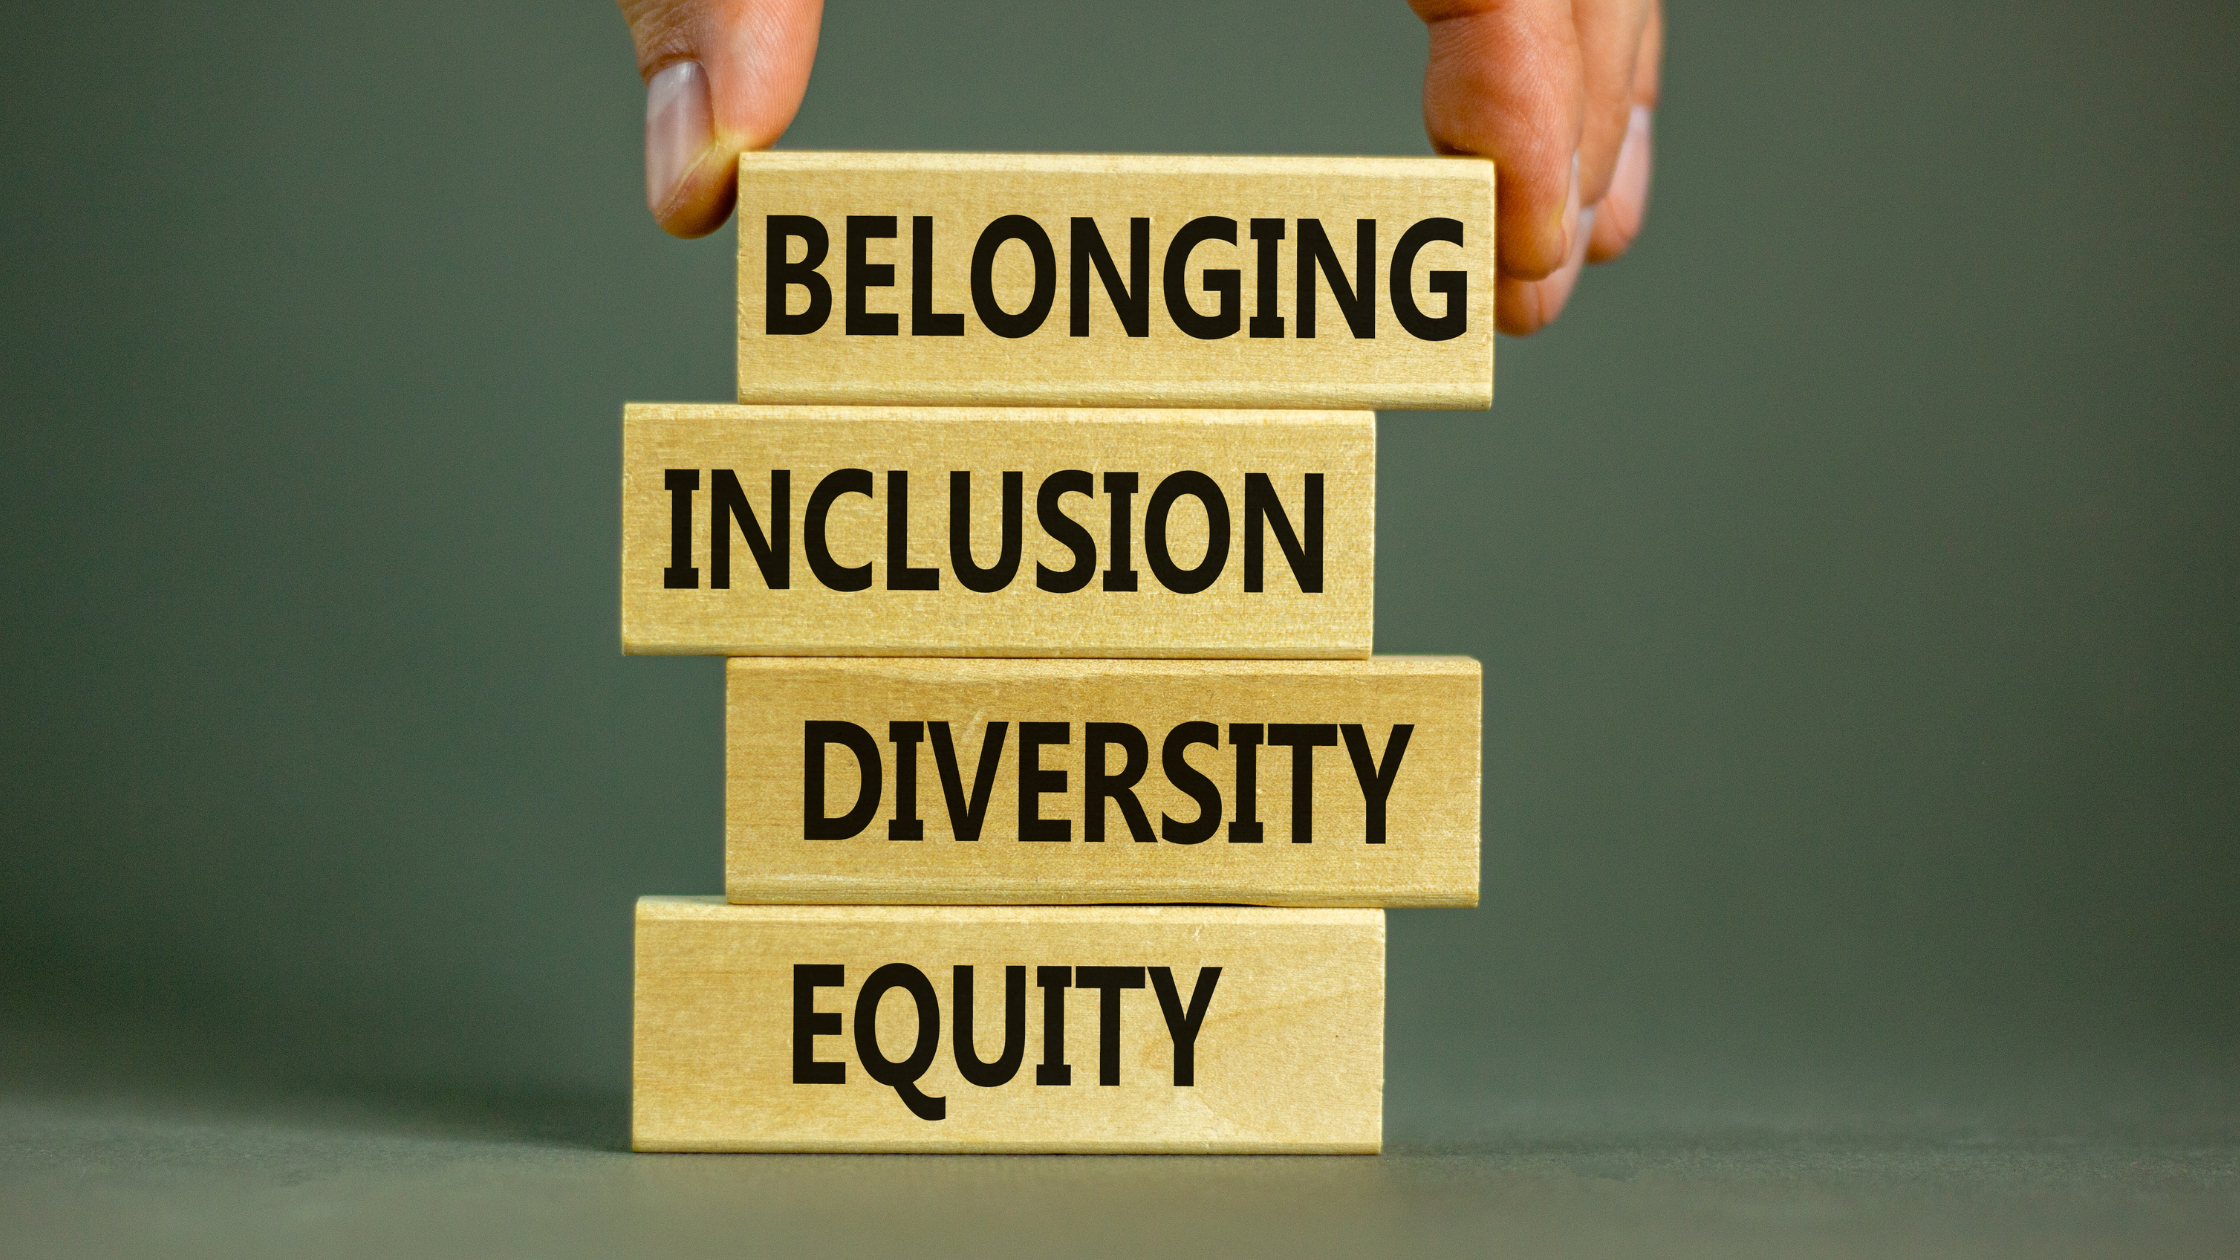 Adding the letter B for “Belonging” to Diversity, Equity, Inclusion, now DEI&B